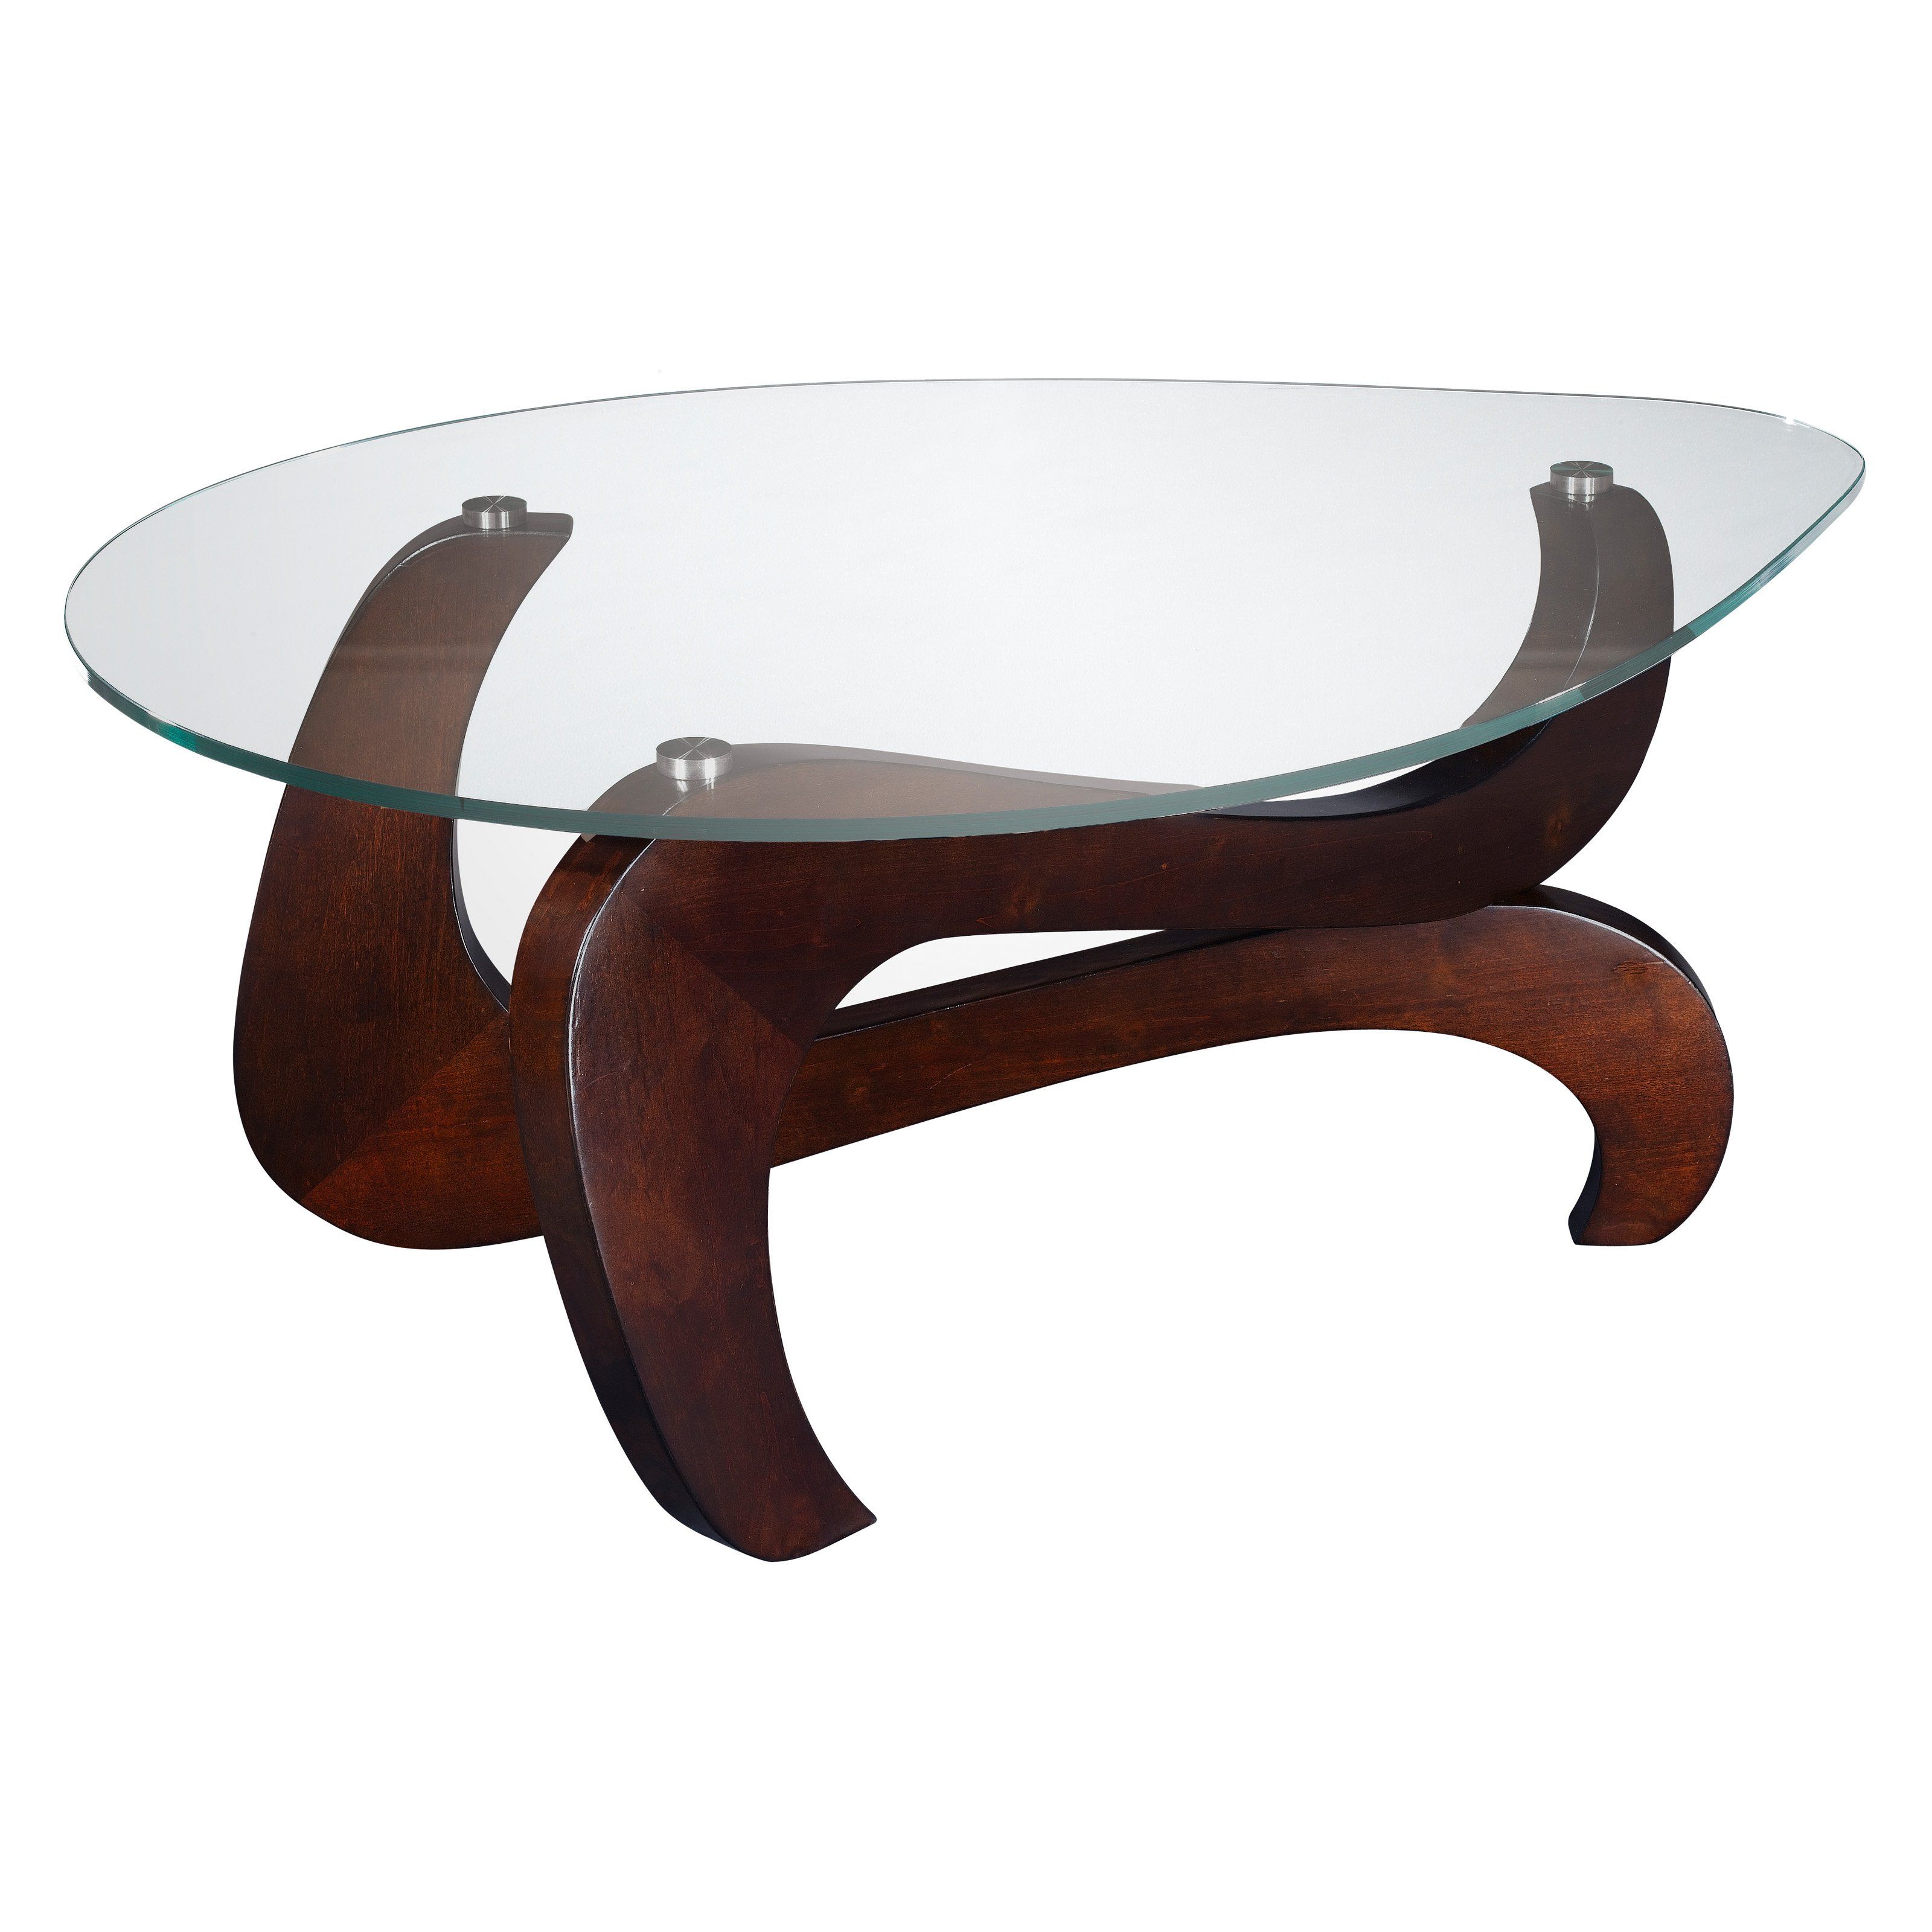 Modern Low Coffee Table Modern Design Sofa Table Contemporary Wooden Beautiful Interior Furniture Design (View 3 of 9)